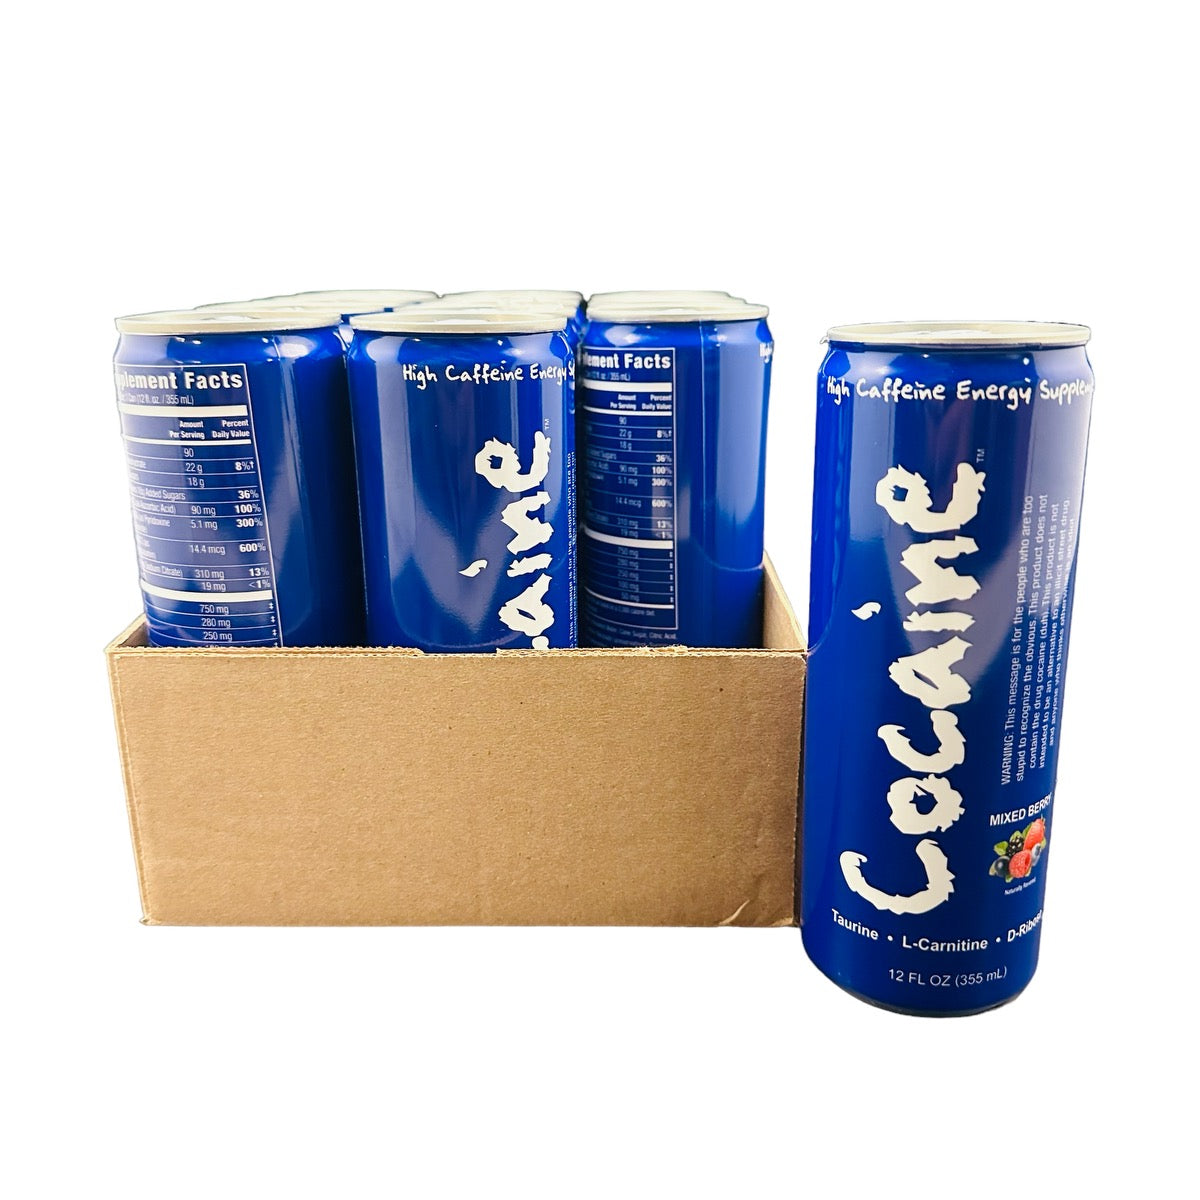 Cocaine Energy Drink 12 Pack of 12 fl oz Cans (Flavor Options Available) (B2B)